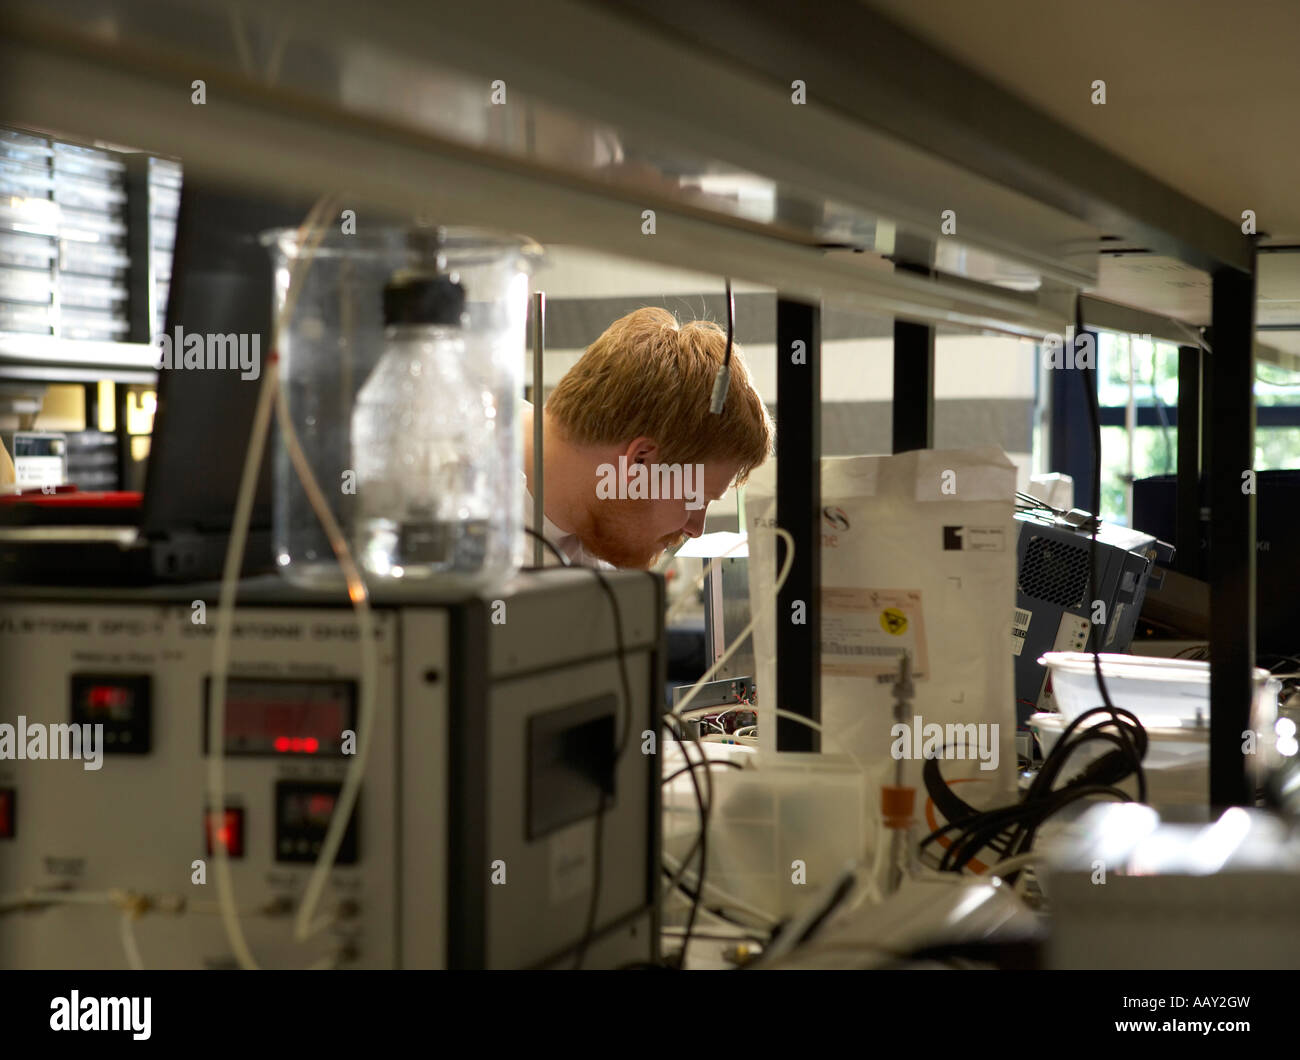 Scientist working in a laboratory Stock Photo